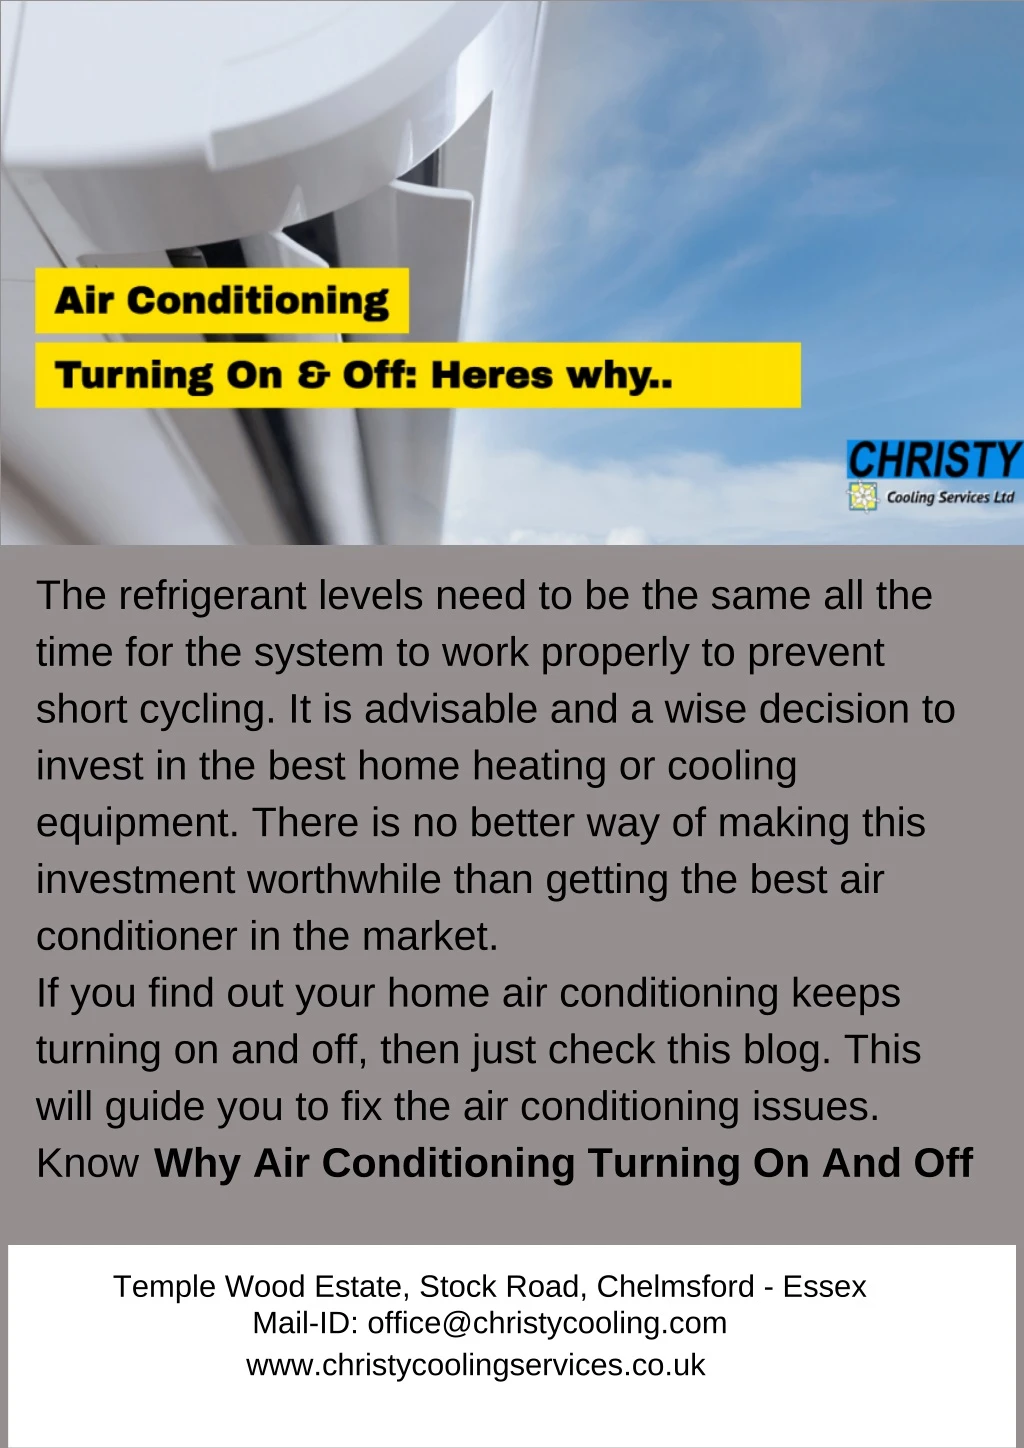 the refrigerant levels need to be the same